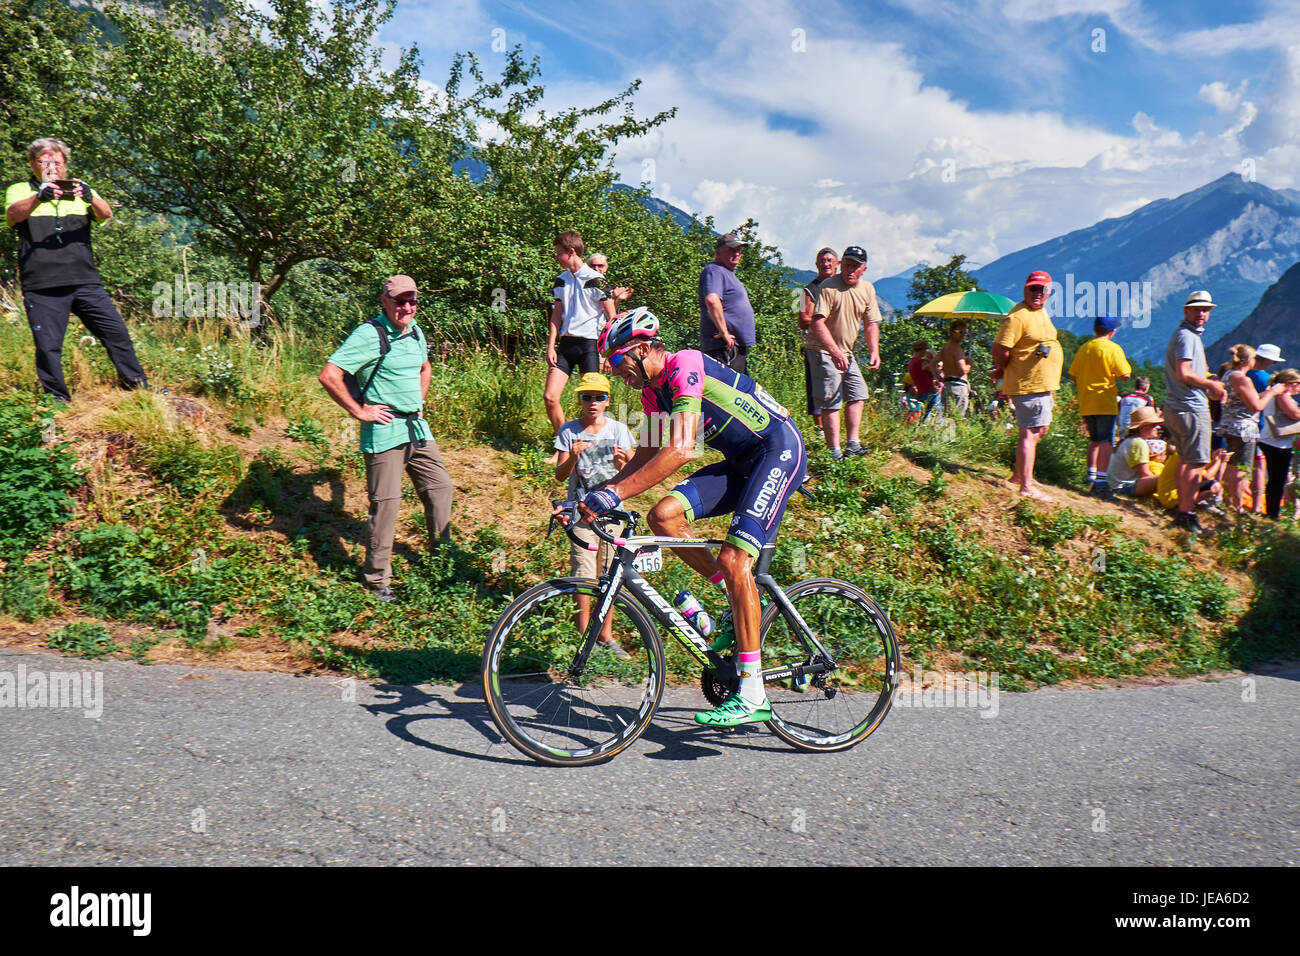 MONTVERNIER, FRANCE - JULY 23, 2015: Ruben Plaza Molina, from team Lampre, struggling on the mountain roads on his way up Montvernier in the Tour de f Stock Photo